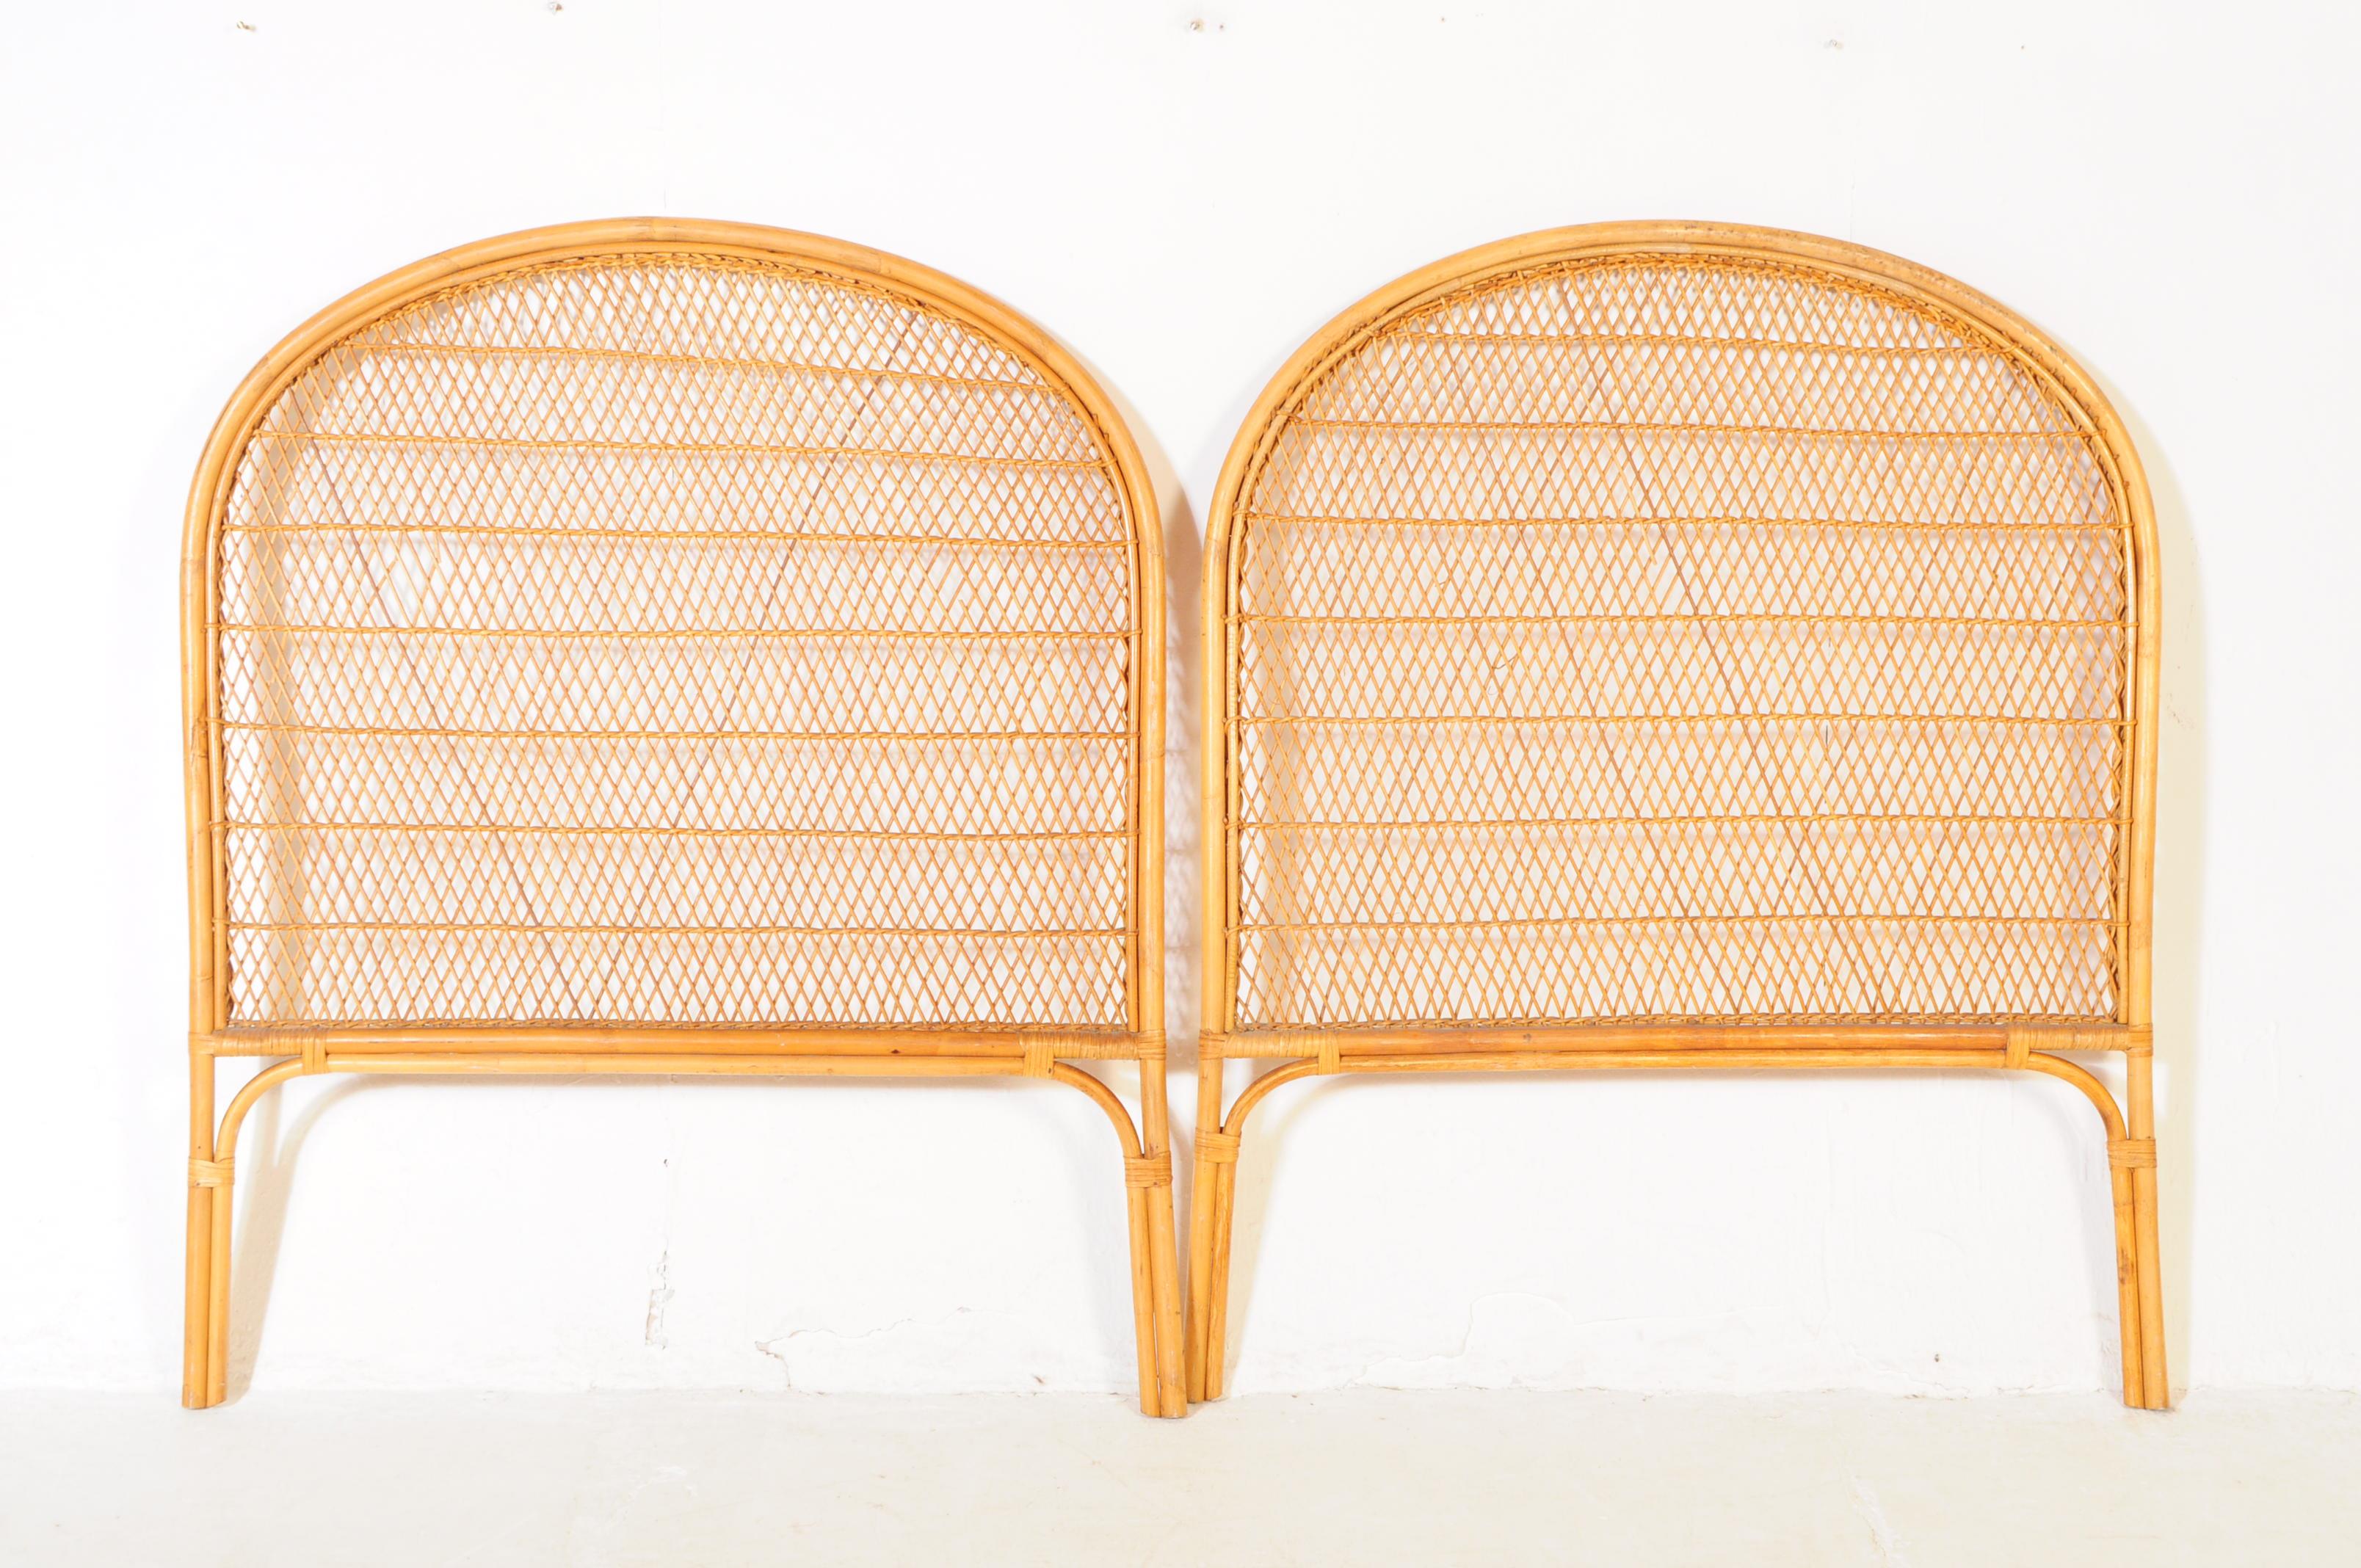 PAIR OF WICKER & BAMBOO HEADBOARDS - Image 4 of 4